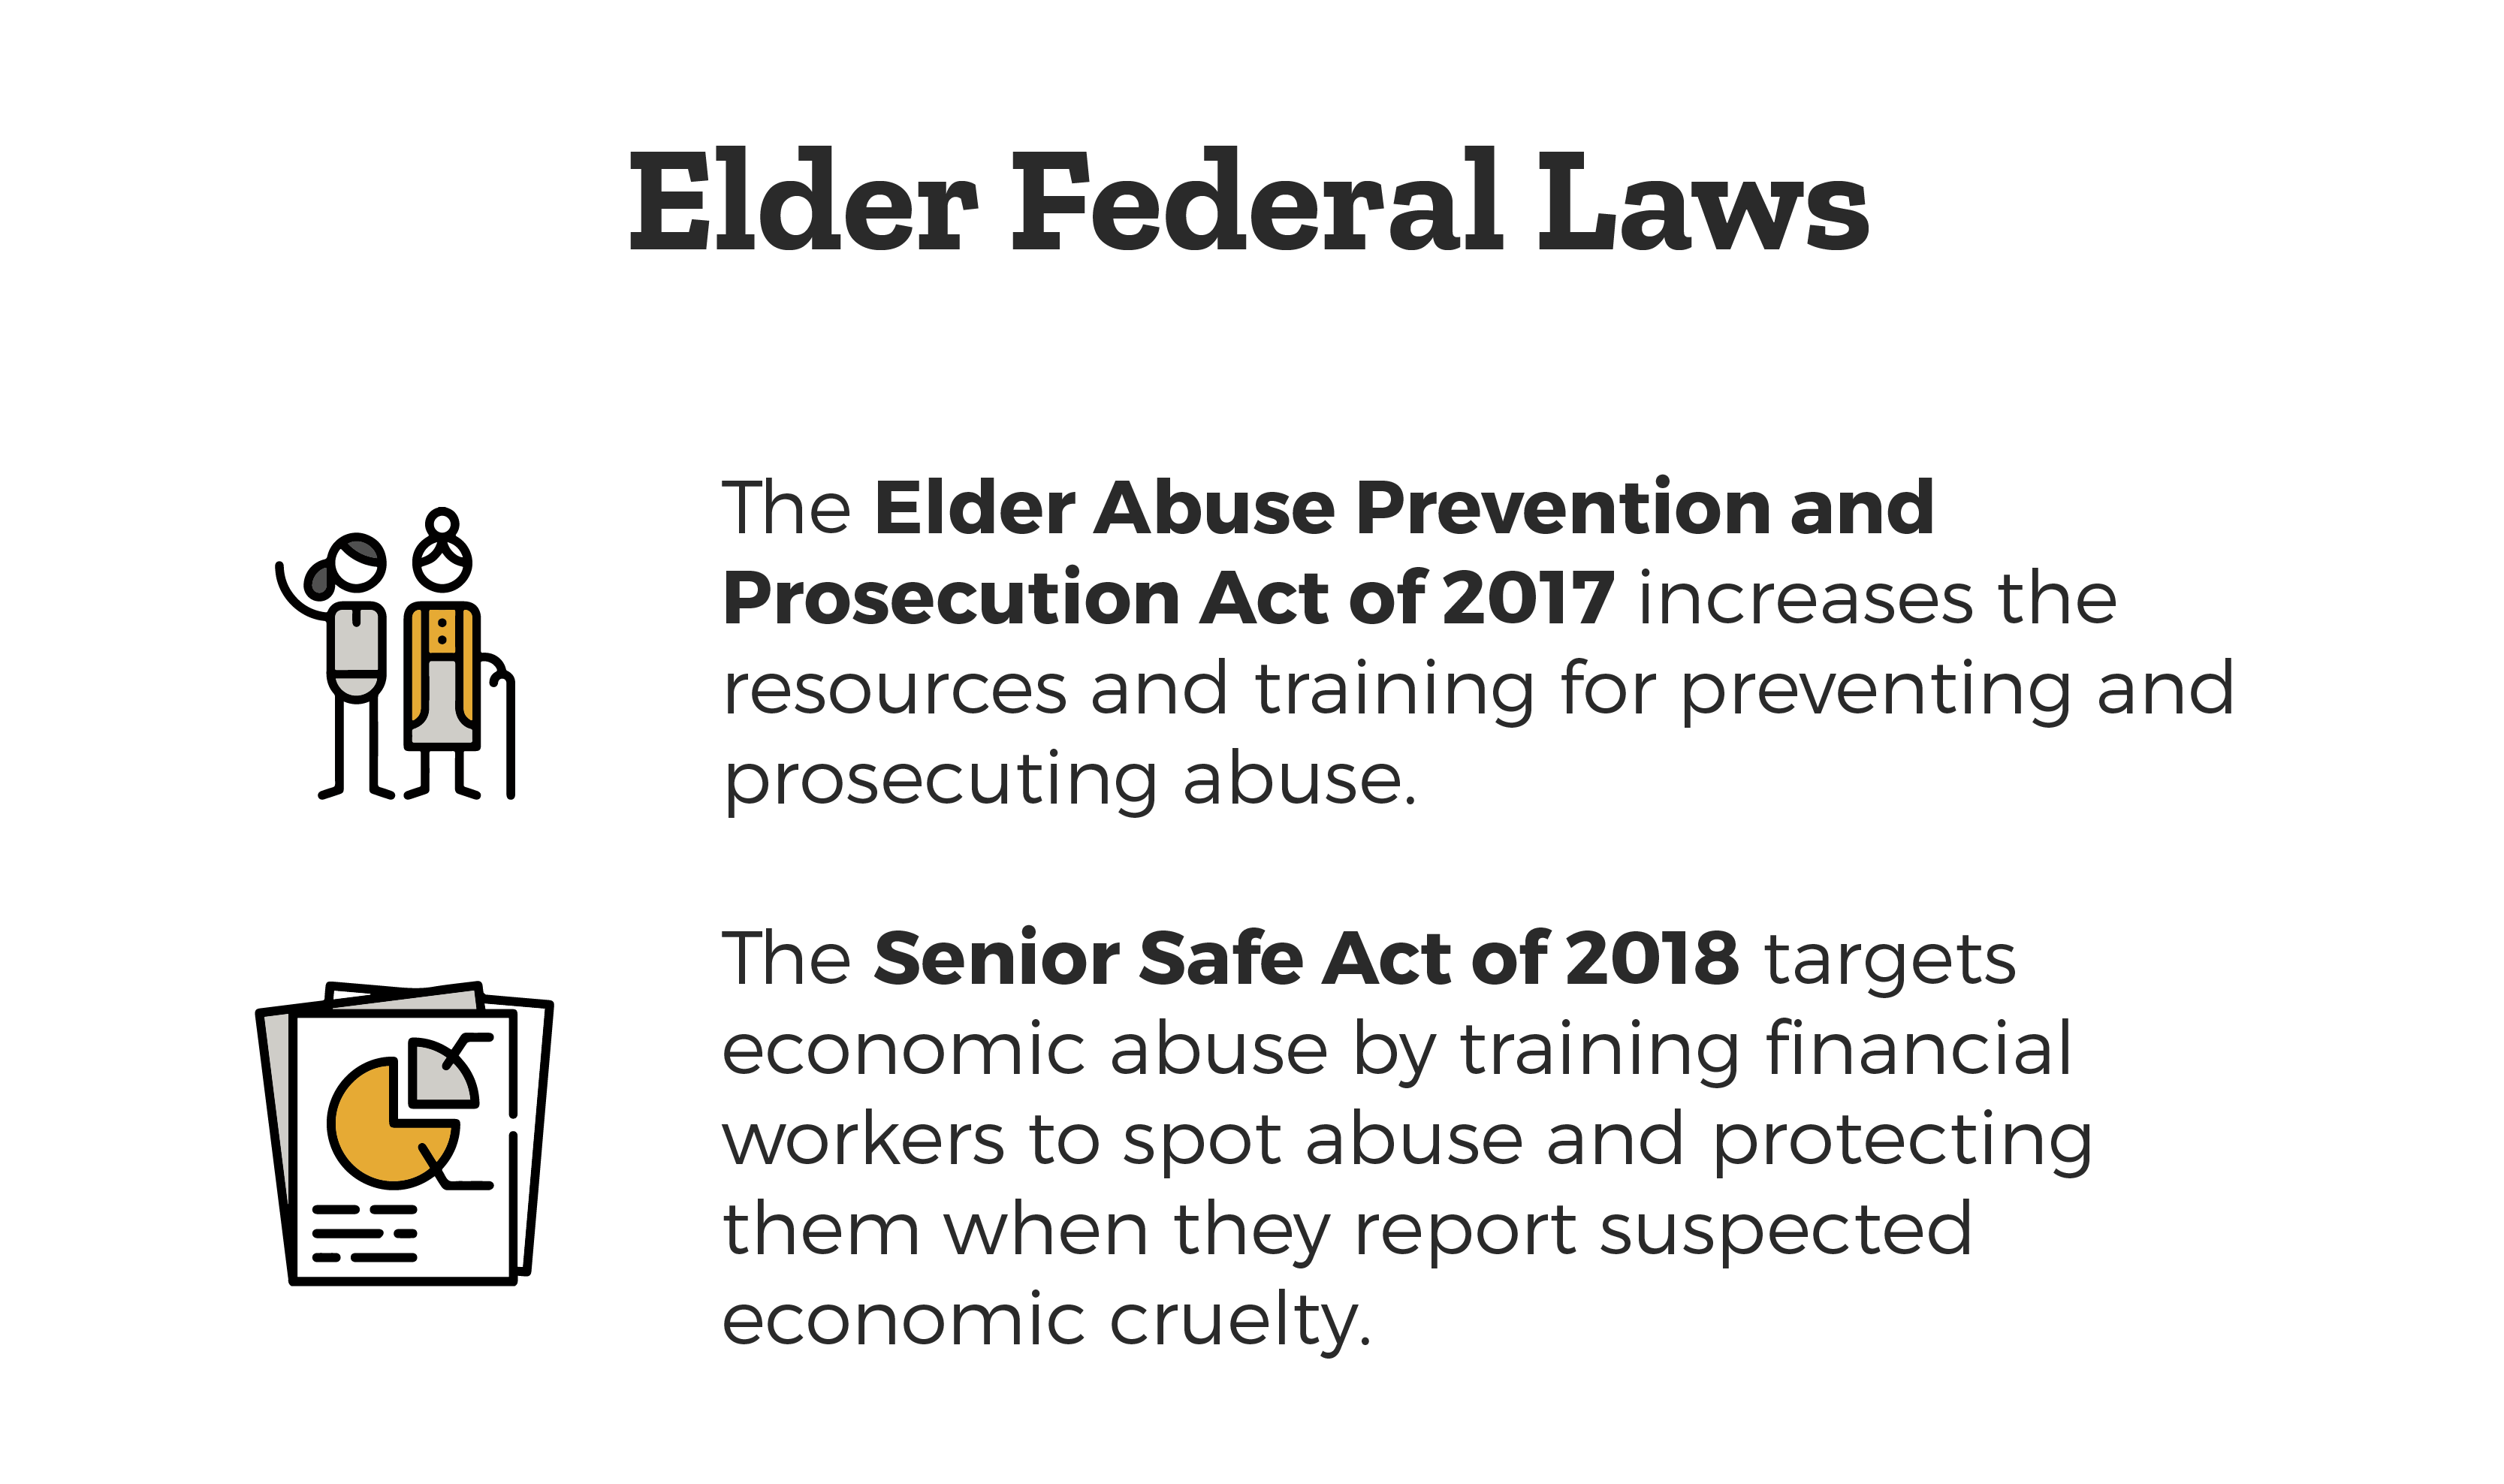 Elder Federal Laws - Elder Abuse Prevention and Prosecution Act of 2017  which increases the resources and training for preventing and prosecuting abuse and the Senior Safe Act of 2018 targets economic abuse by training financial workers to spot abuse and protecting them when they report suspected economic cruelty.